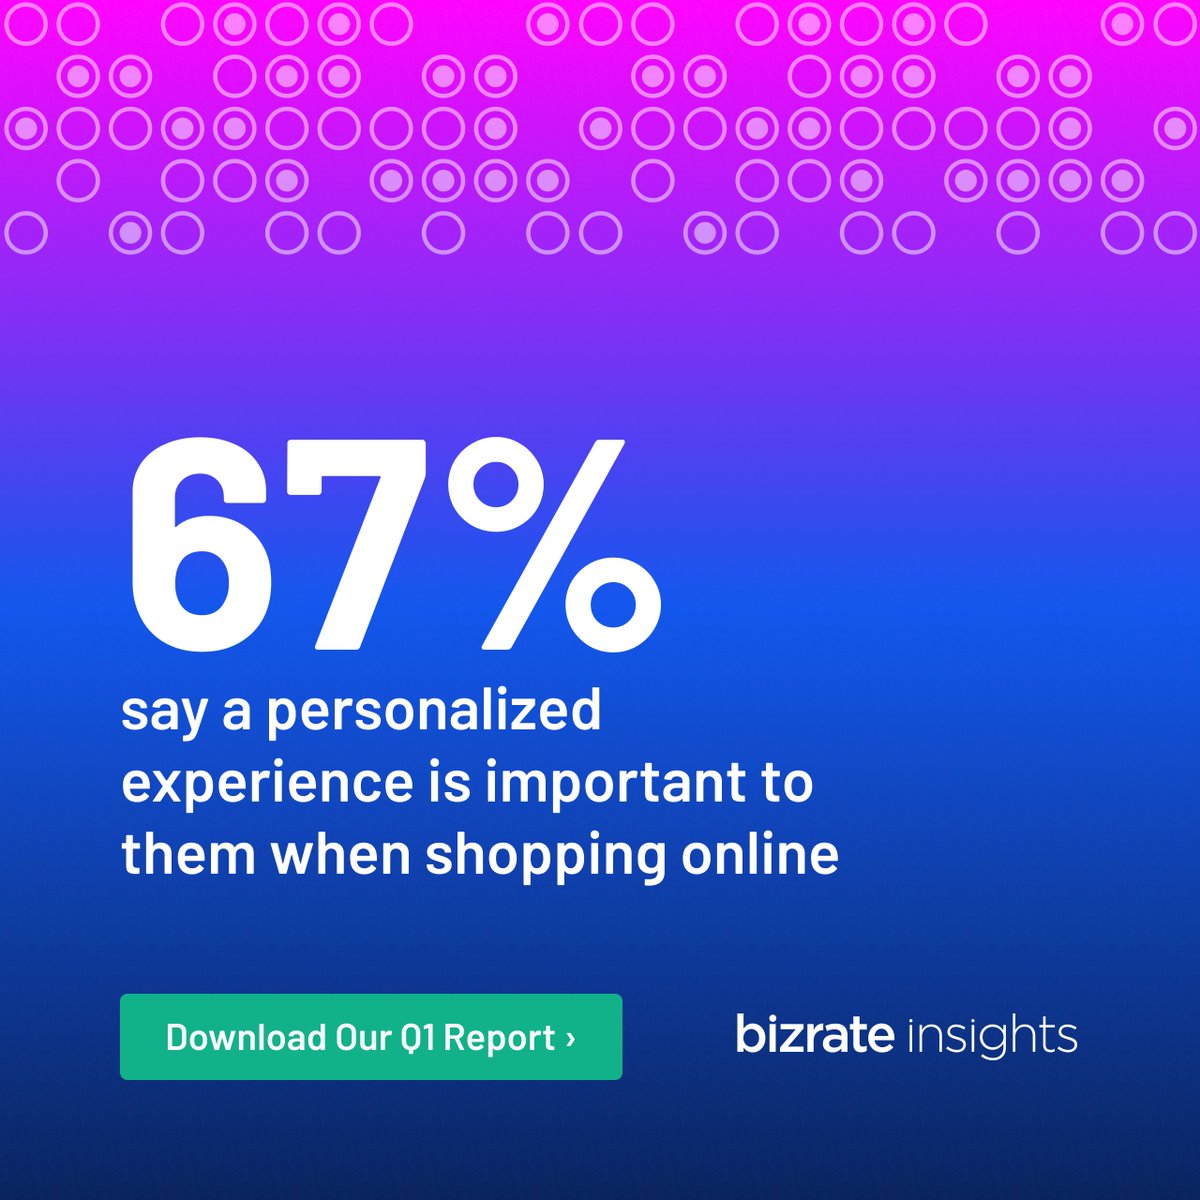 Just like any lasting relationship, customers are more likely to stick with brands who know them and make them feel seen and valued. Grab your copy of our customer loyalty report today: hubs.li/Q02w9hhk0

#Ecommerce #CustomerInsights #CustomerLoyalty #CustomerSatisfaction